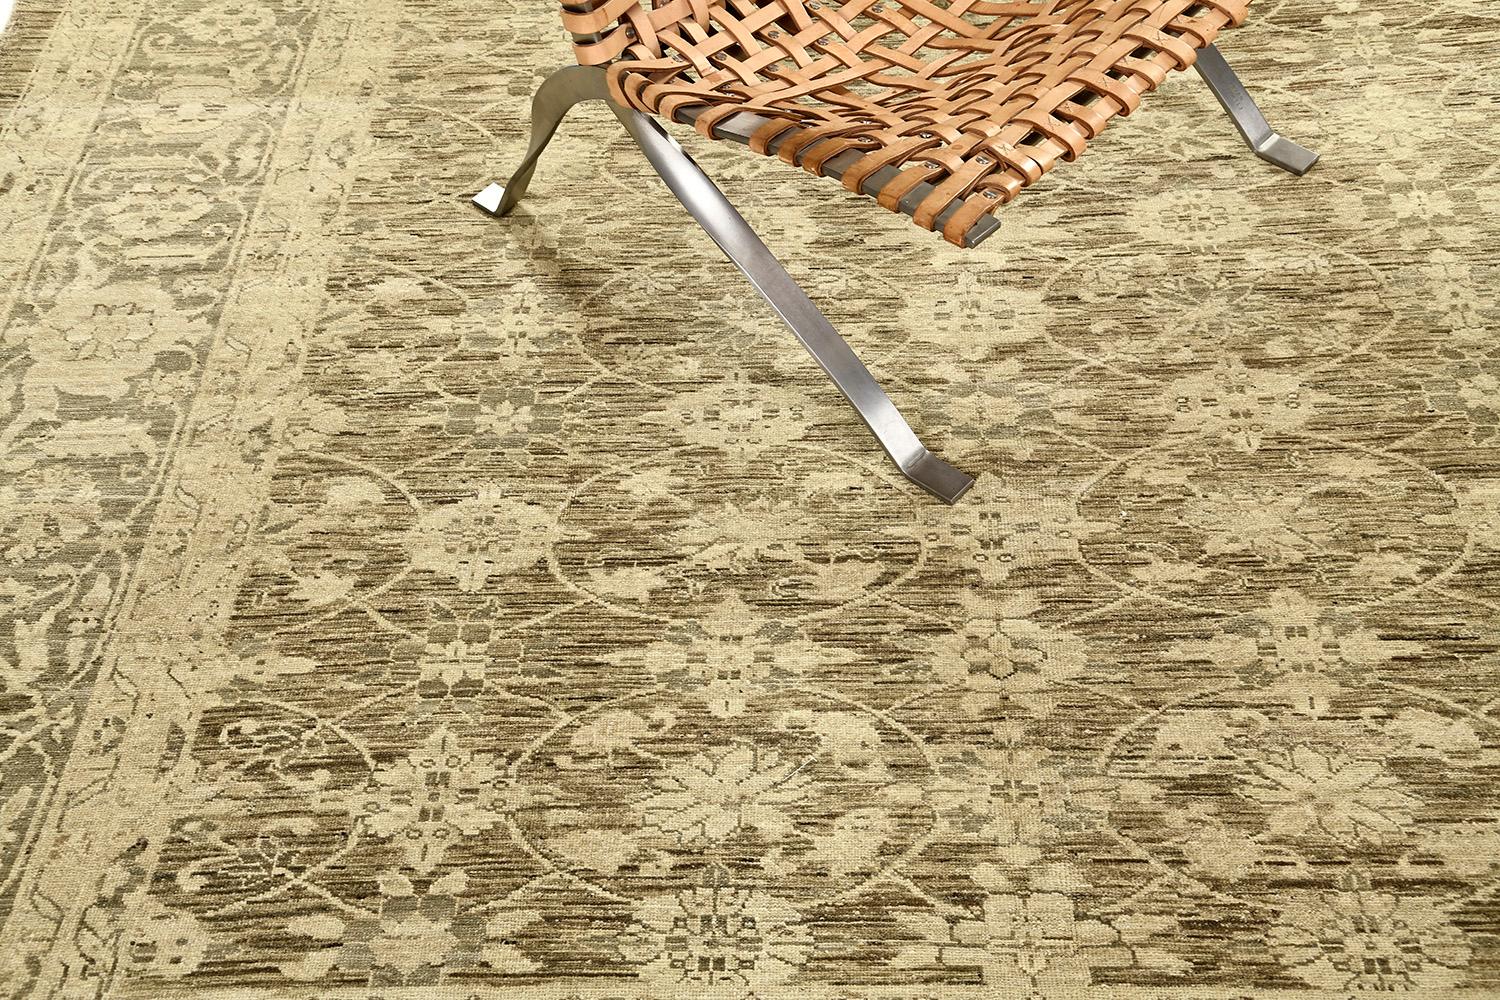 An exquisite revival of Vintage style Mahal rug that evidently shows the intricate details of the allover pattern dancing along the sandy field featuring the warm tones of brown, gray and gold. Featuring the blooming palmettes, lotus, serrated